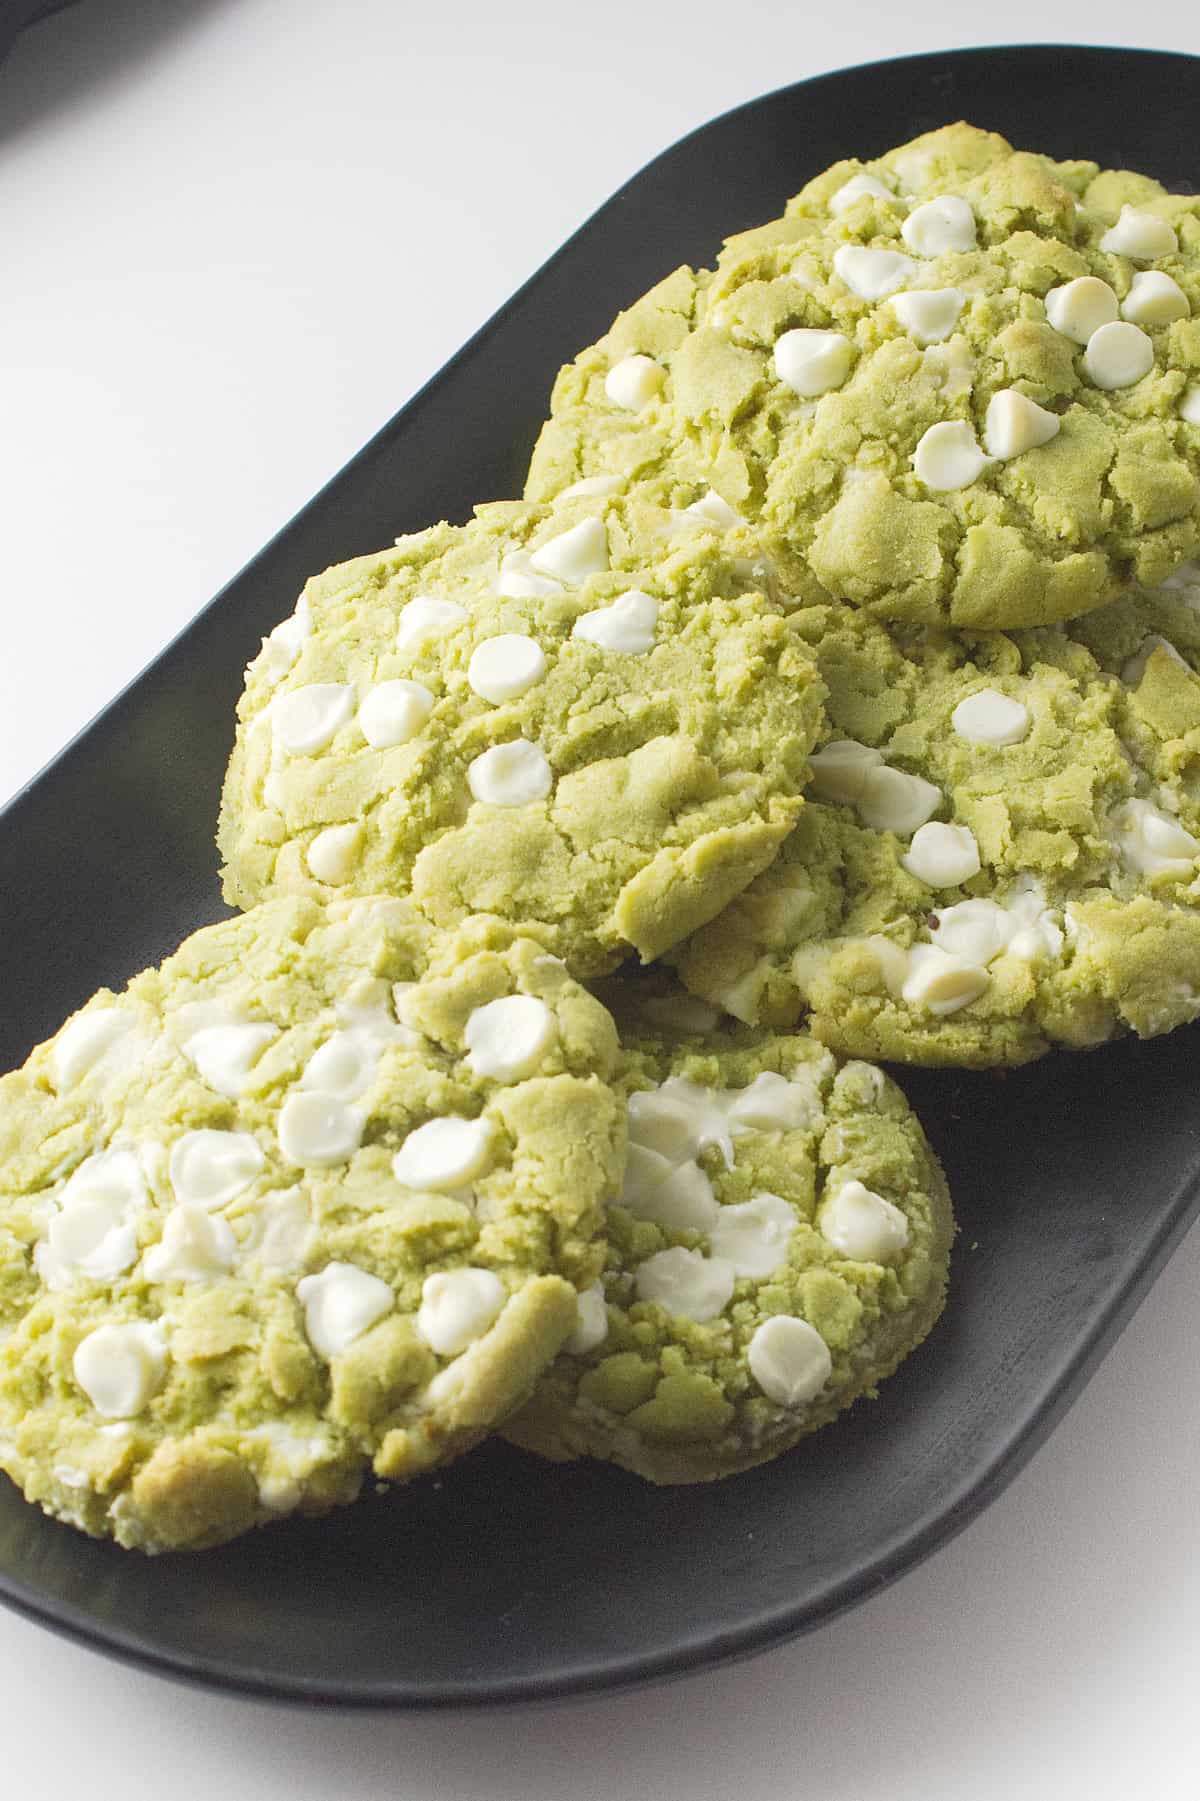 Platter or green matcha tea cookies with white chocolate chips.